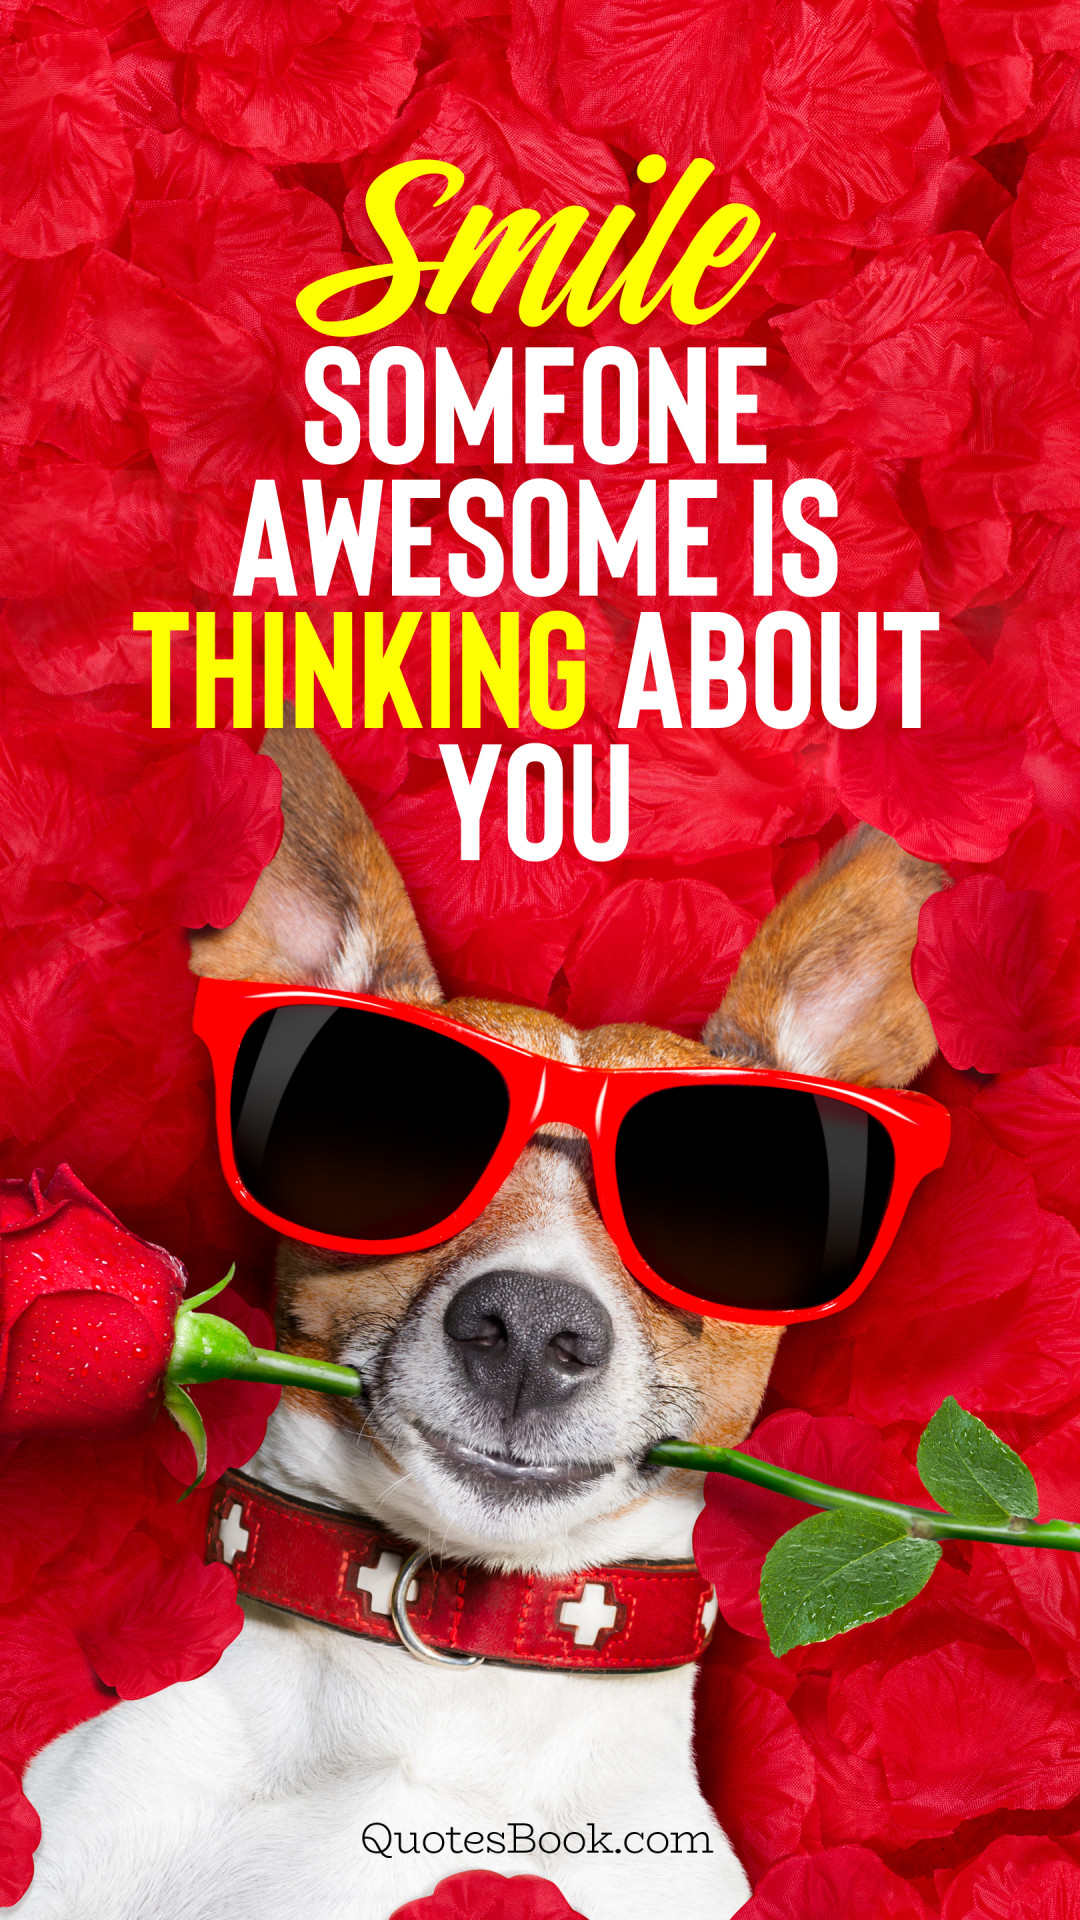 Smile someone awesome is thinking about you - QuotesBook